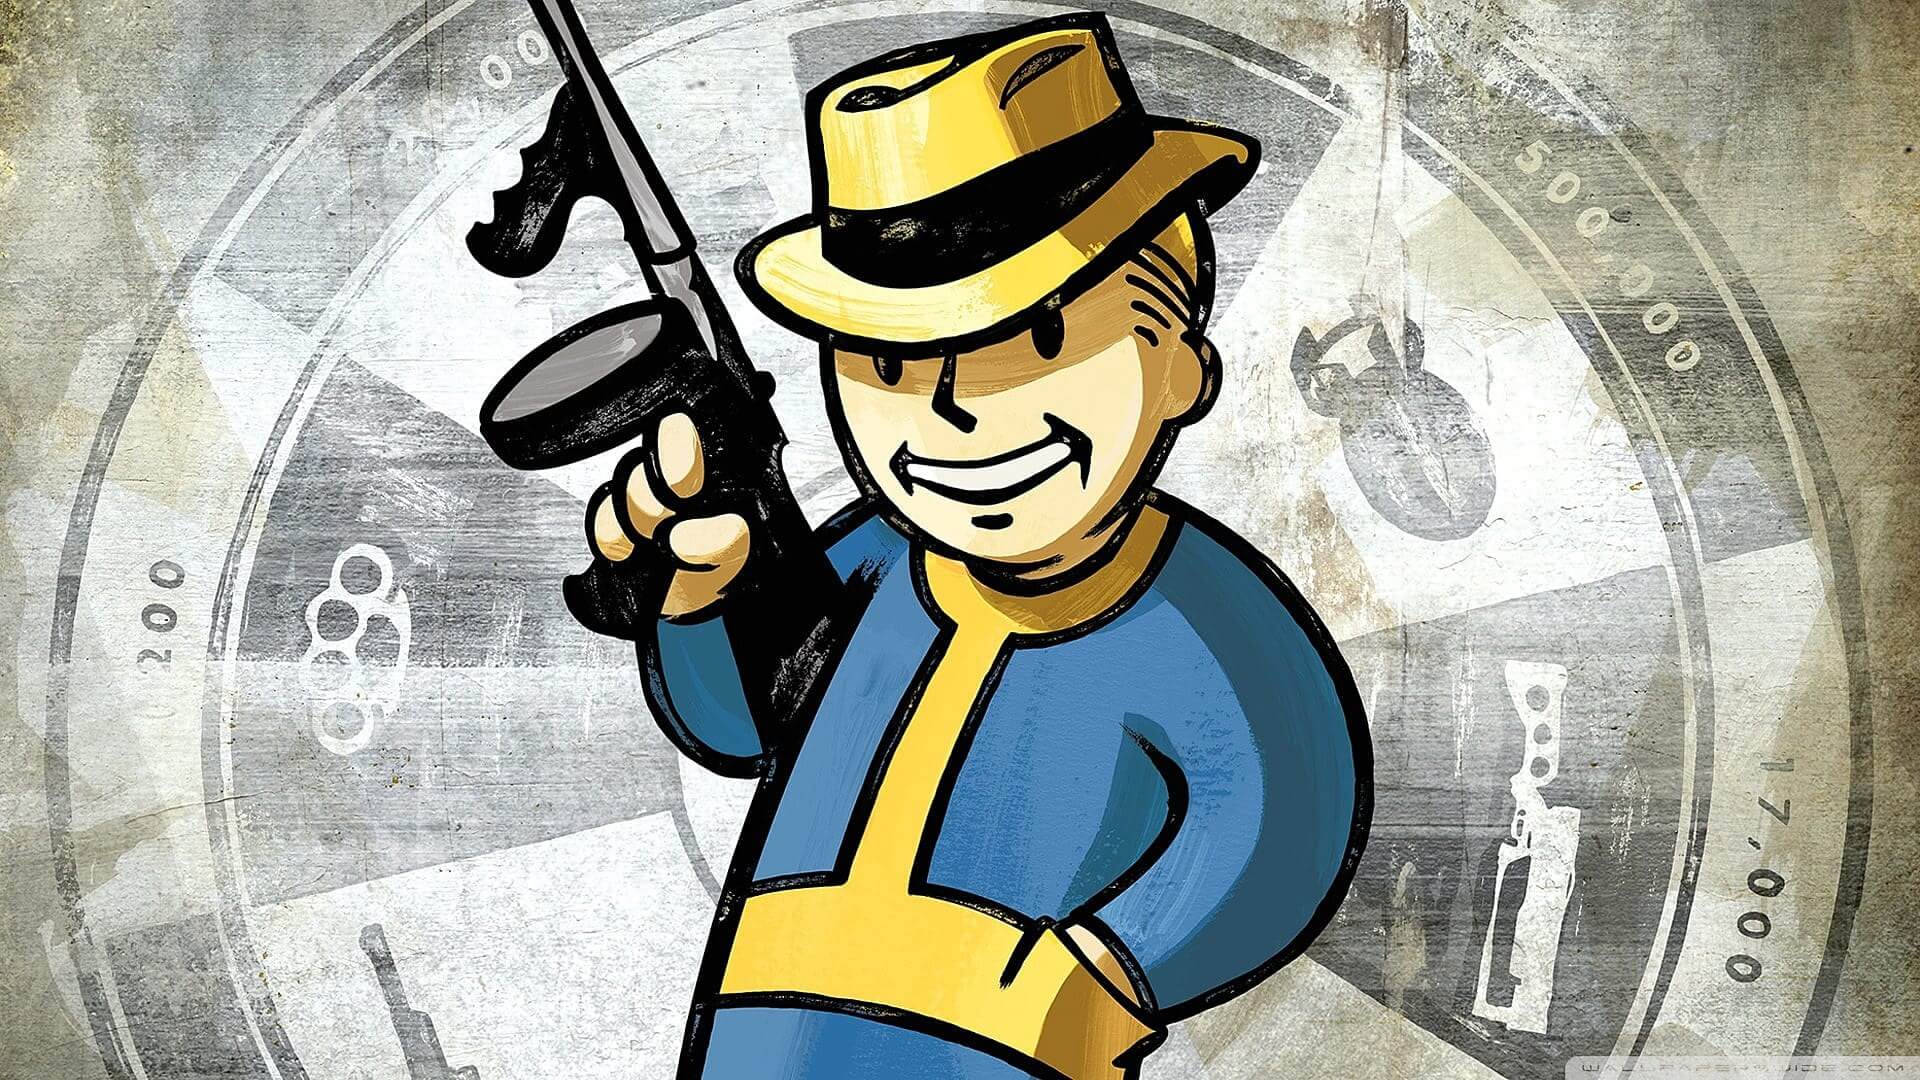 Fallout 76's glitched NPCs will steal your best weapon when you die, and you can't get it back